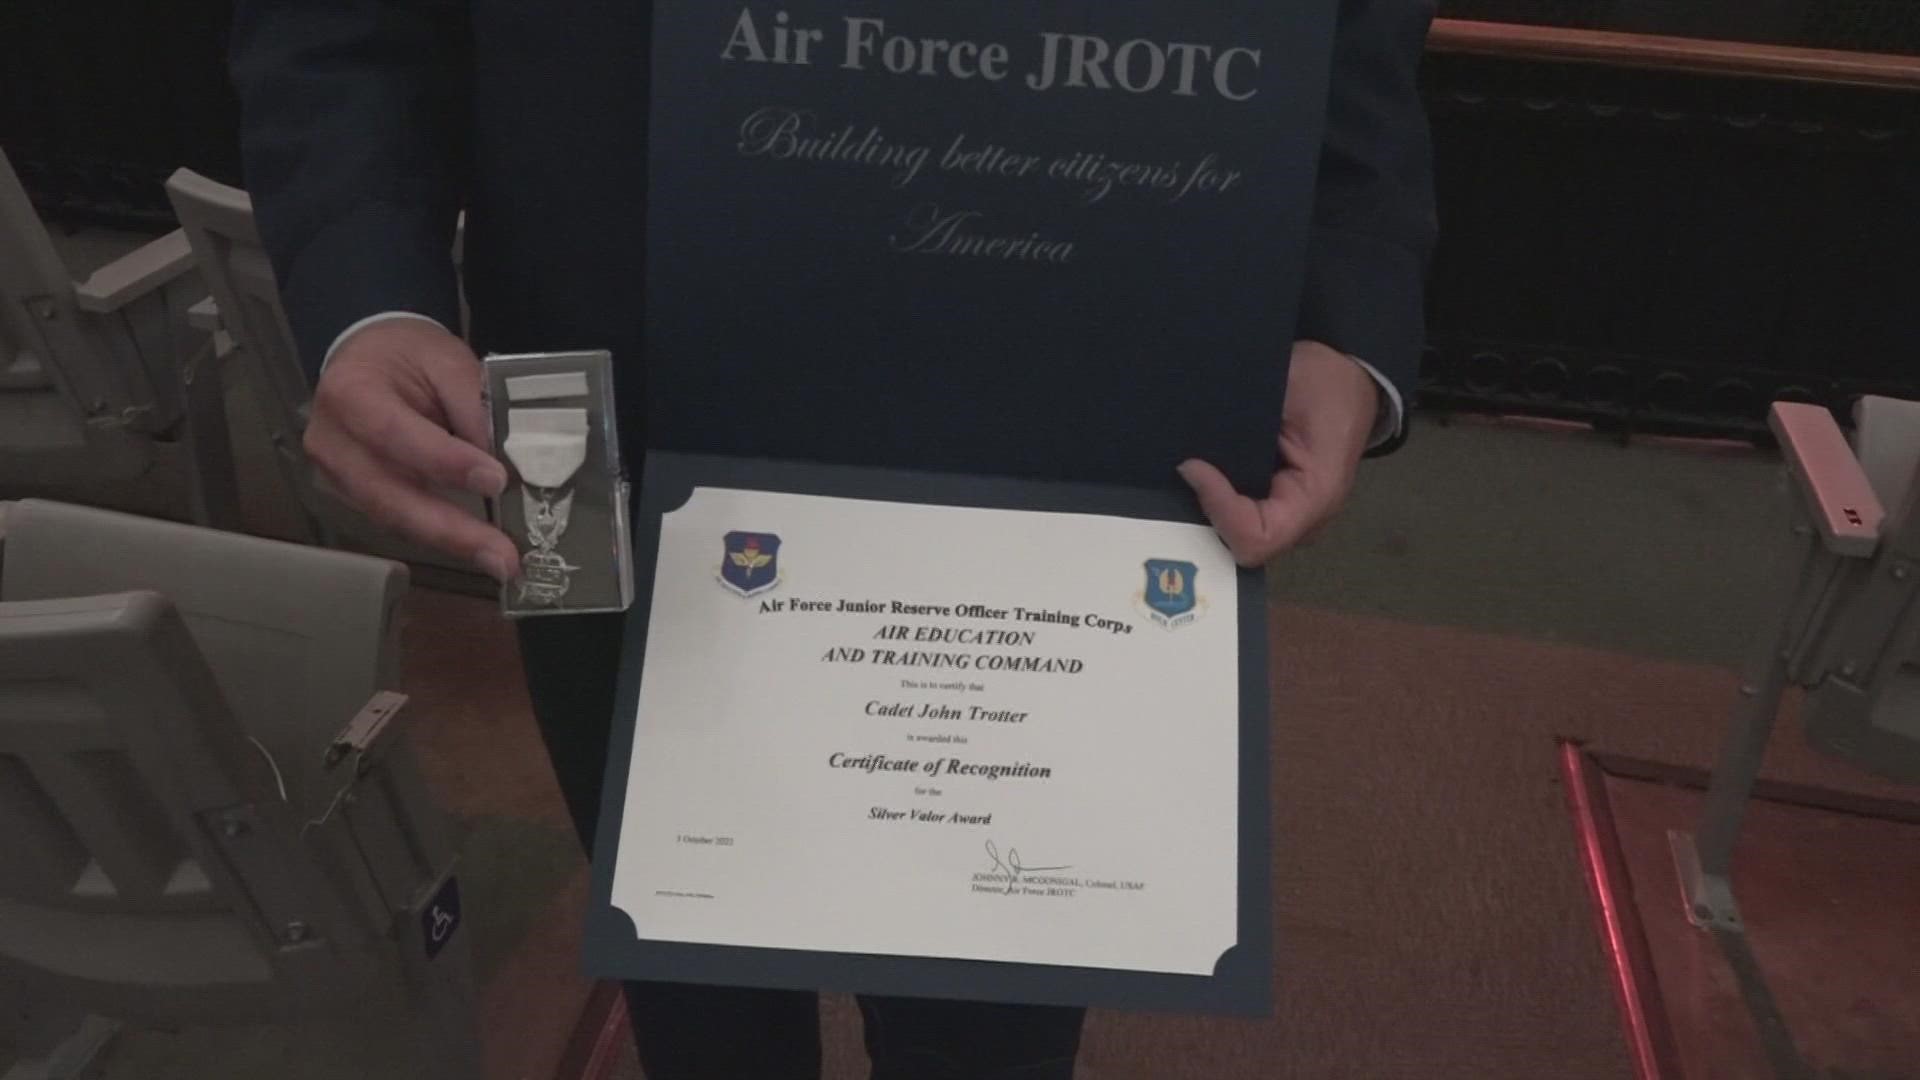 Friday afternoon, a Missouri teen was honored with the rare Silver Valor award. Cadet John Trotter saved a 5-year-old during the July flooding in St. Louis.